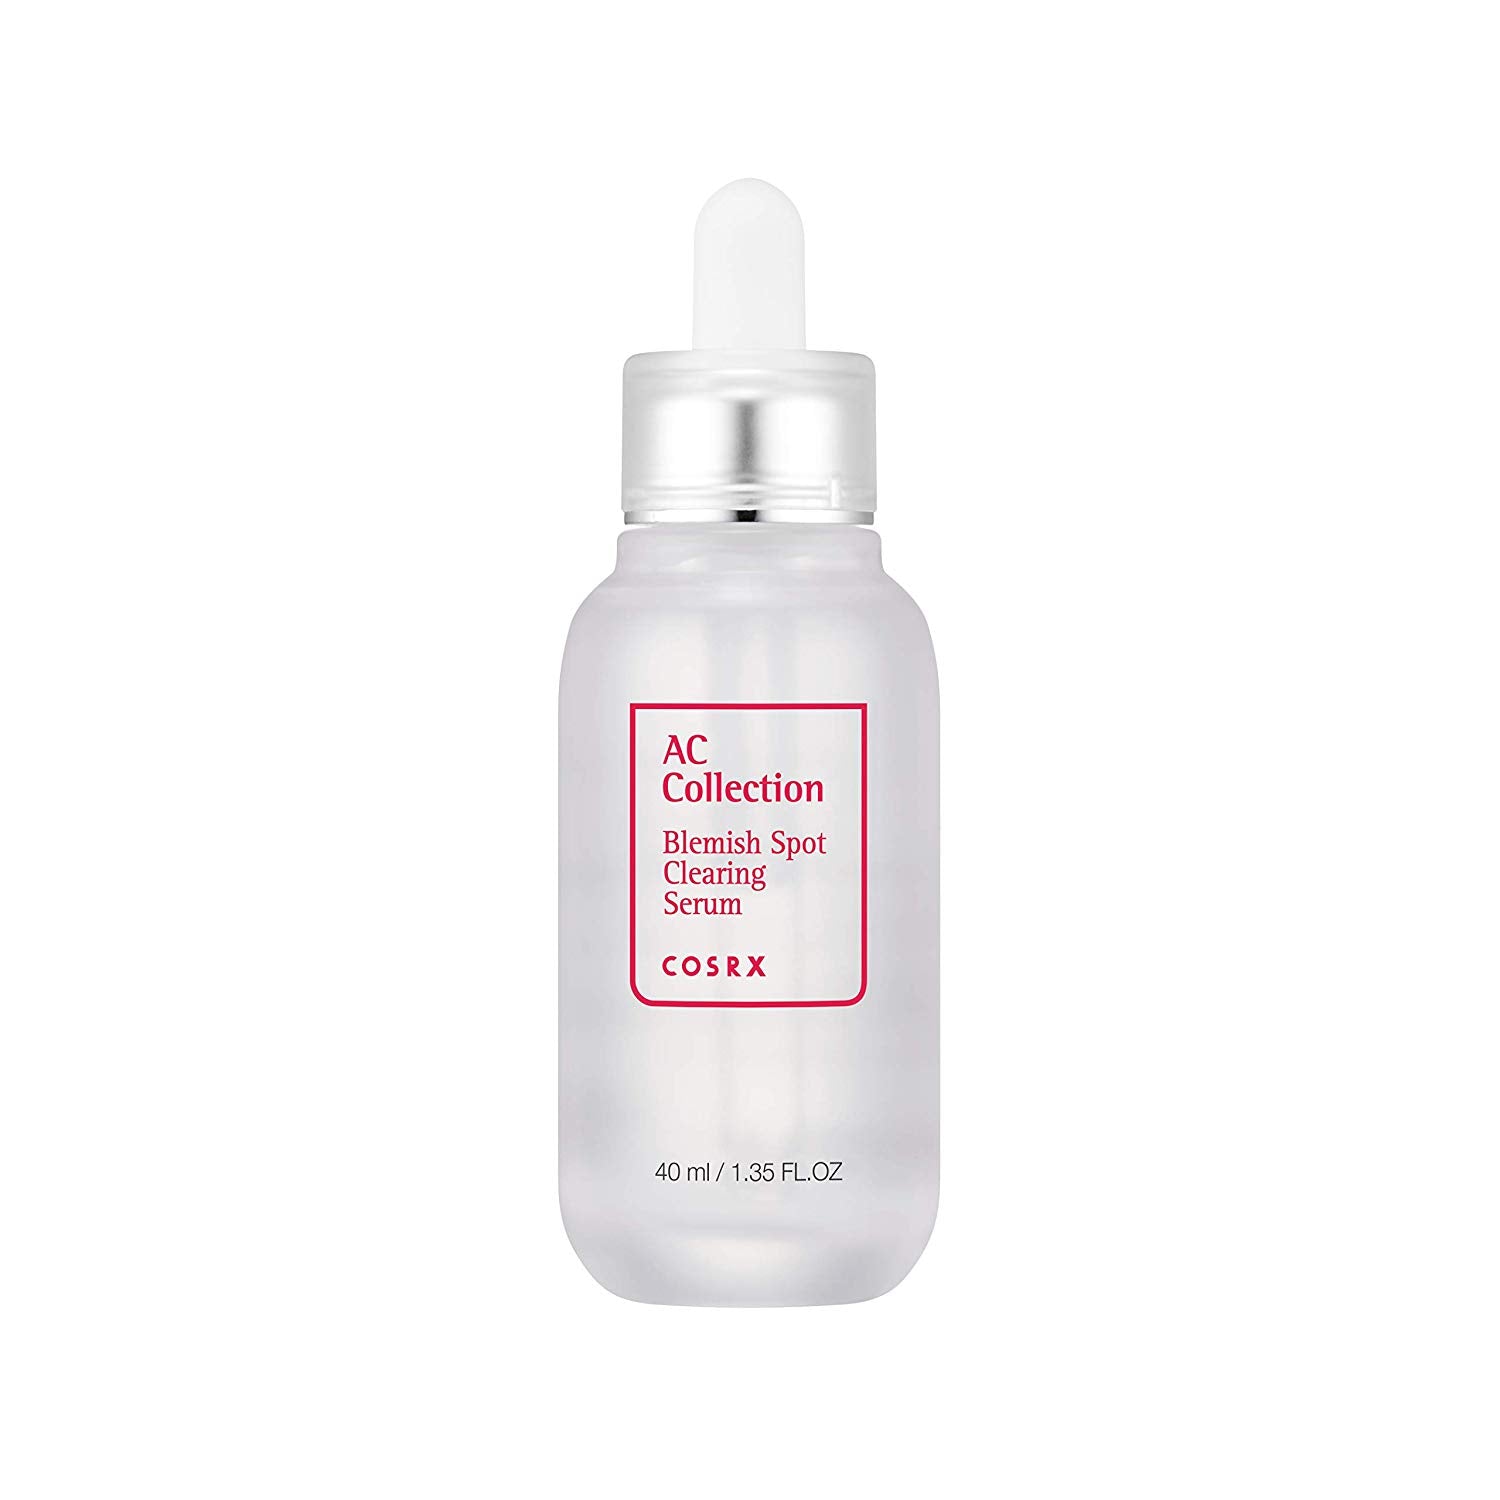 Cosrx AC Collection Blemish Spot Clearing Serum Beauty Cosrx   